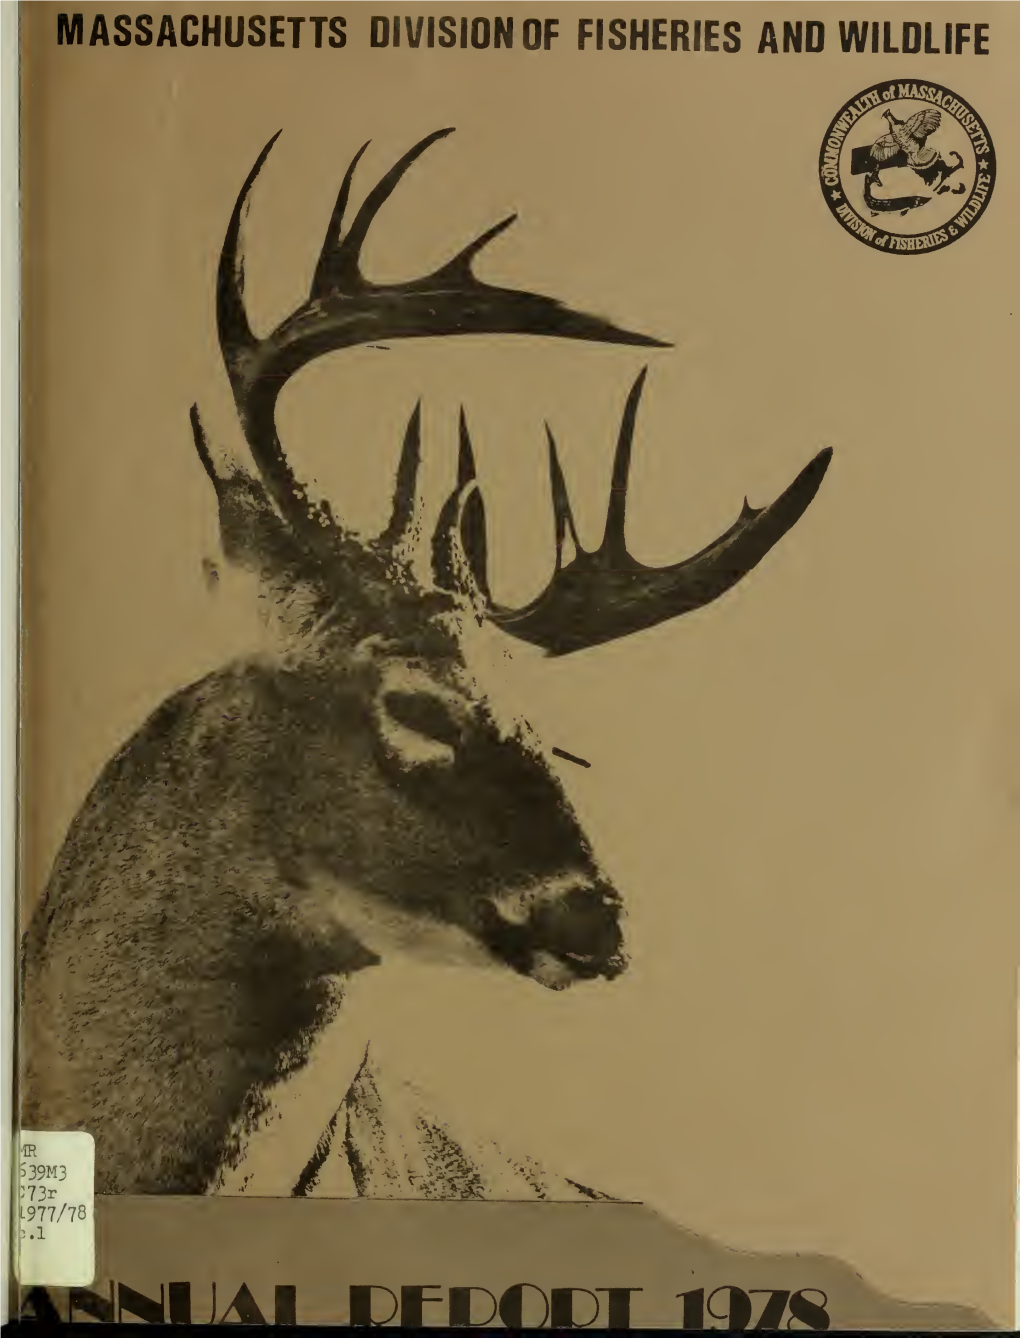 Massachusetts Division of Fisheries and Wildlife Annual Report 1976